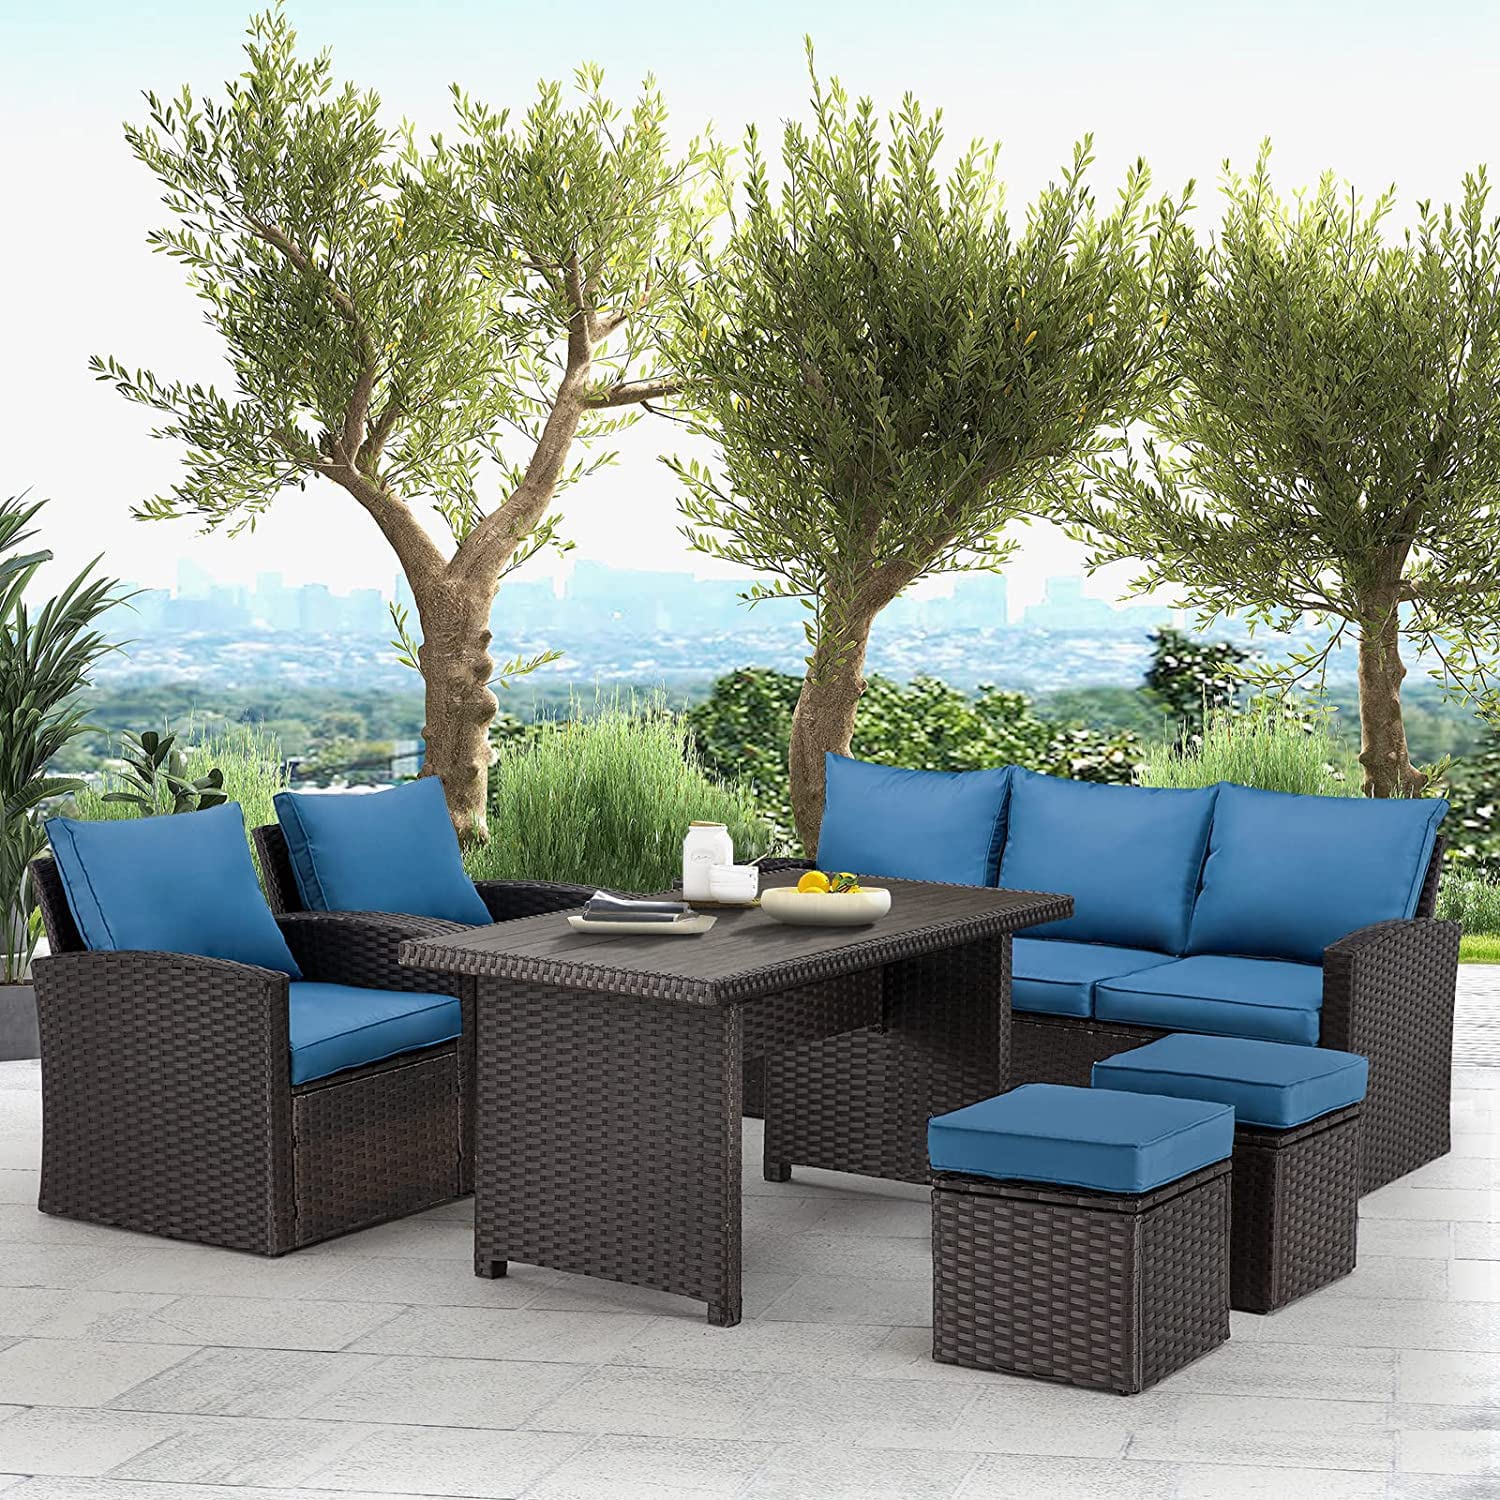 LOCCUS Outdoor Patio Sectional Sofa Set with Ottomans{Dark Brown/Blue}